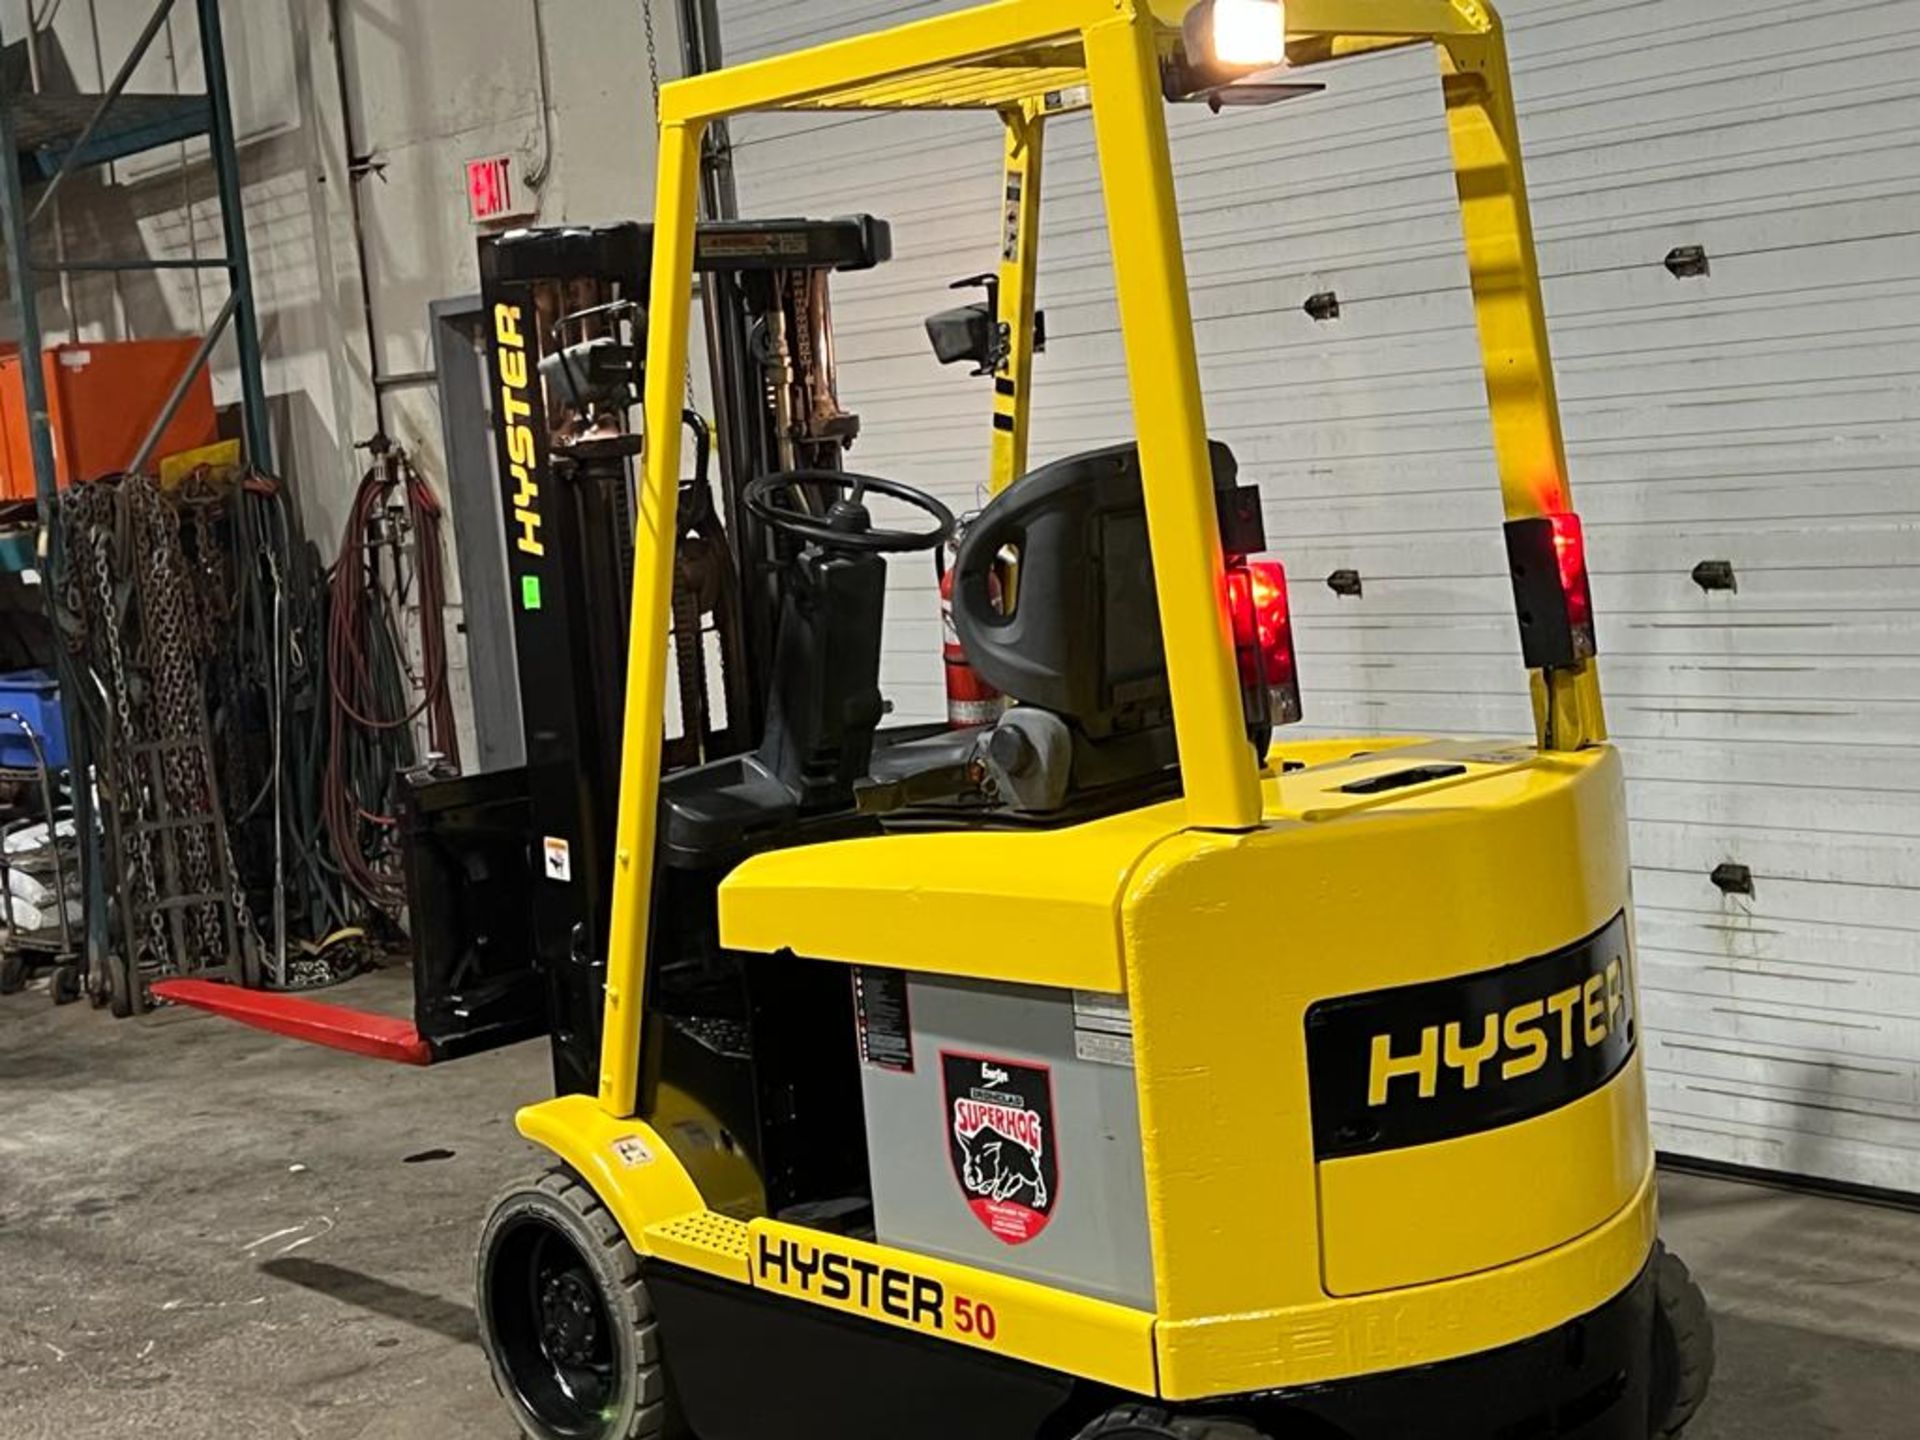 Hyster 5,000lbs Capacity Forklift Electric with Sideshift and 3-stage Mast - FREE CUSTOMS